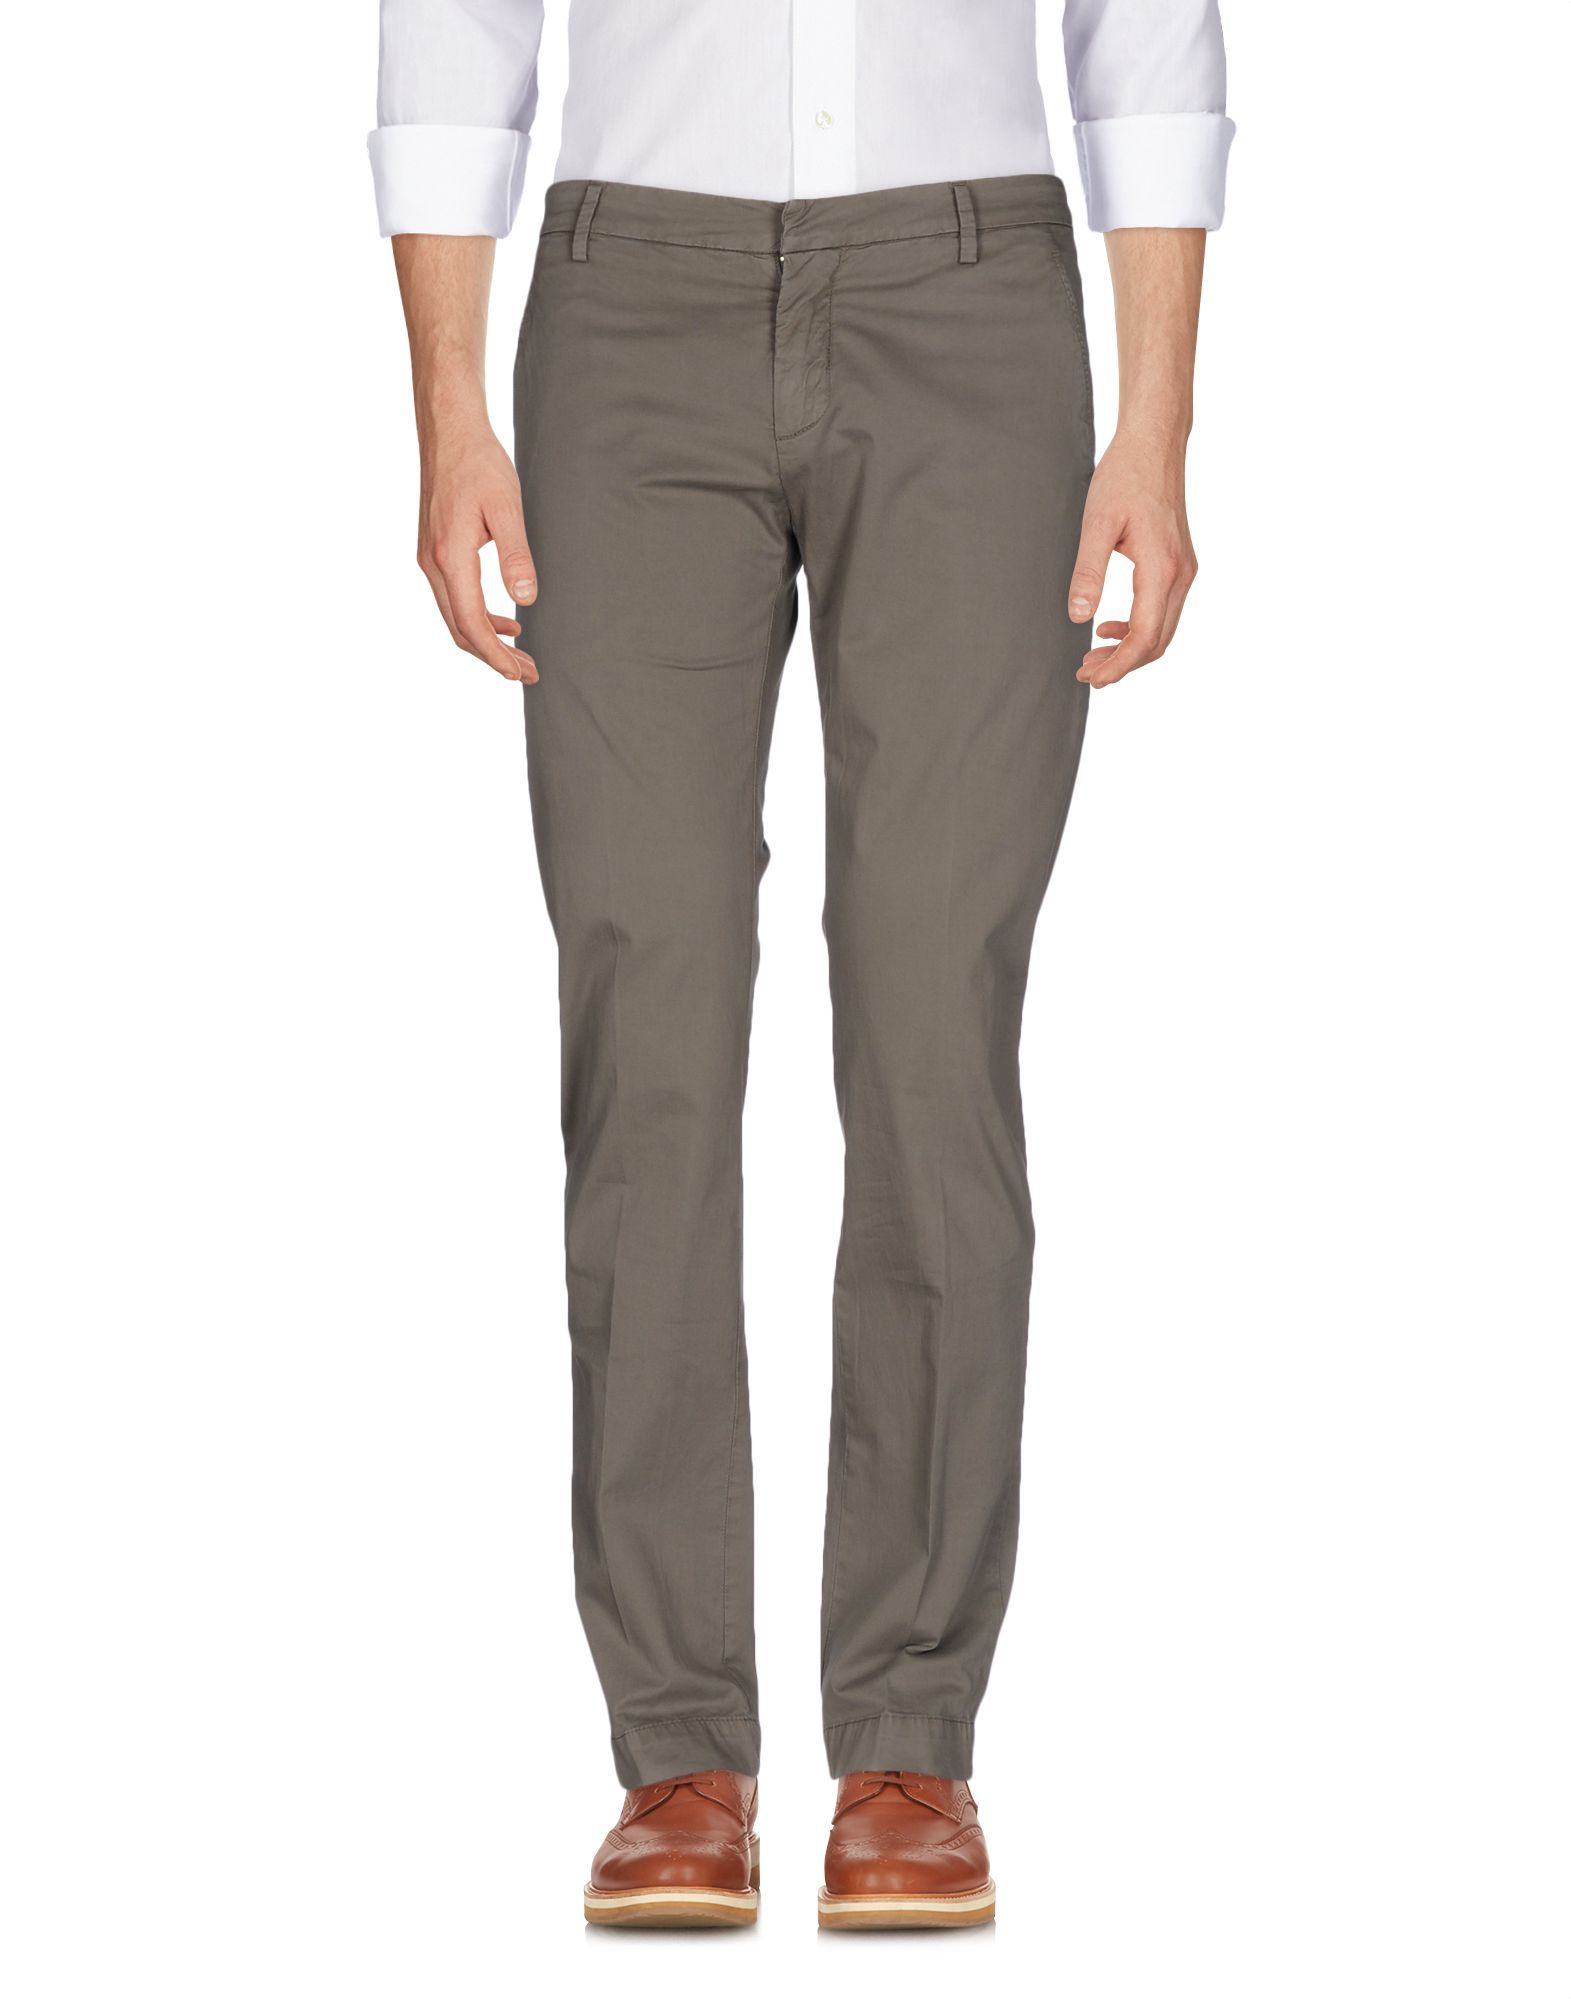 Plain weave<br>Basic solid colour<br>Low waisted<br>Regular fit<br>Straight leg<br>Logo<br>Snap-buttons, zip<br>Multipockets<br>Contains non-textile parts of animal origin<br>Stretch<br>Chinos<br>